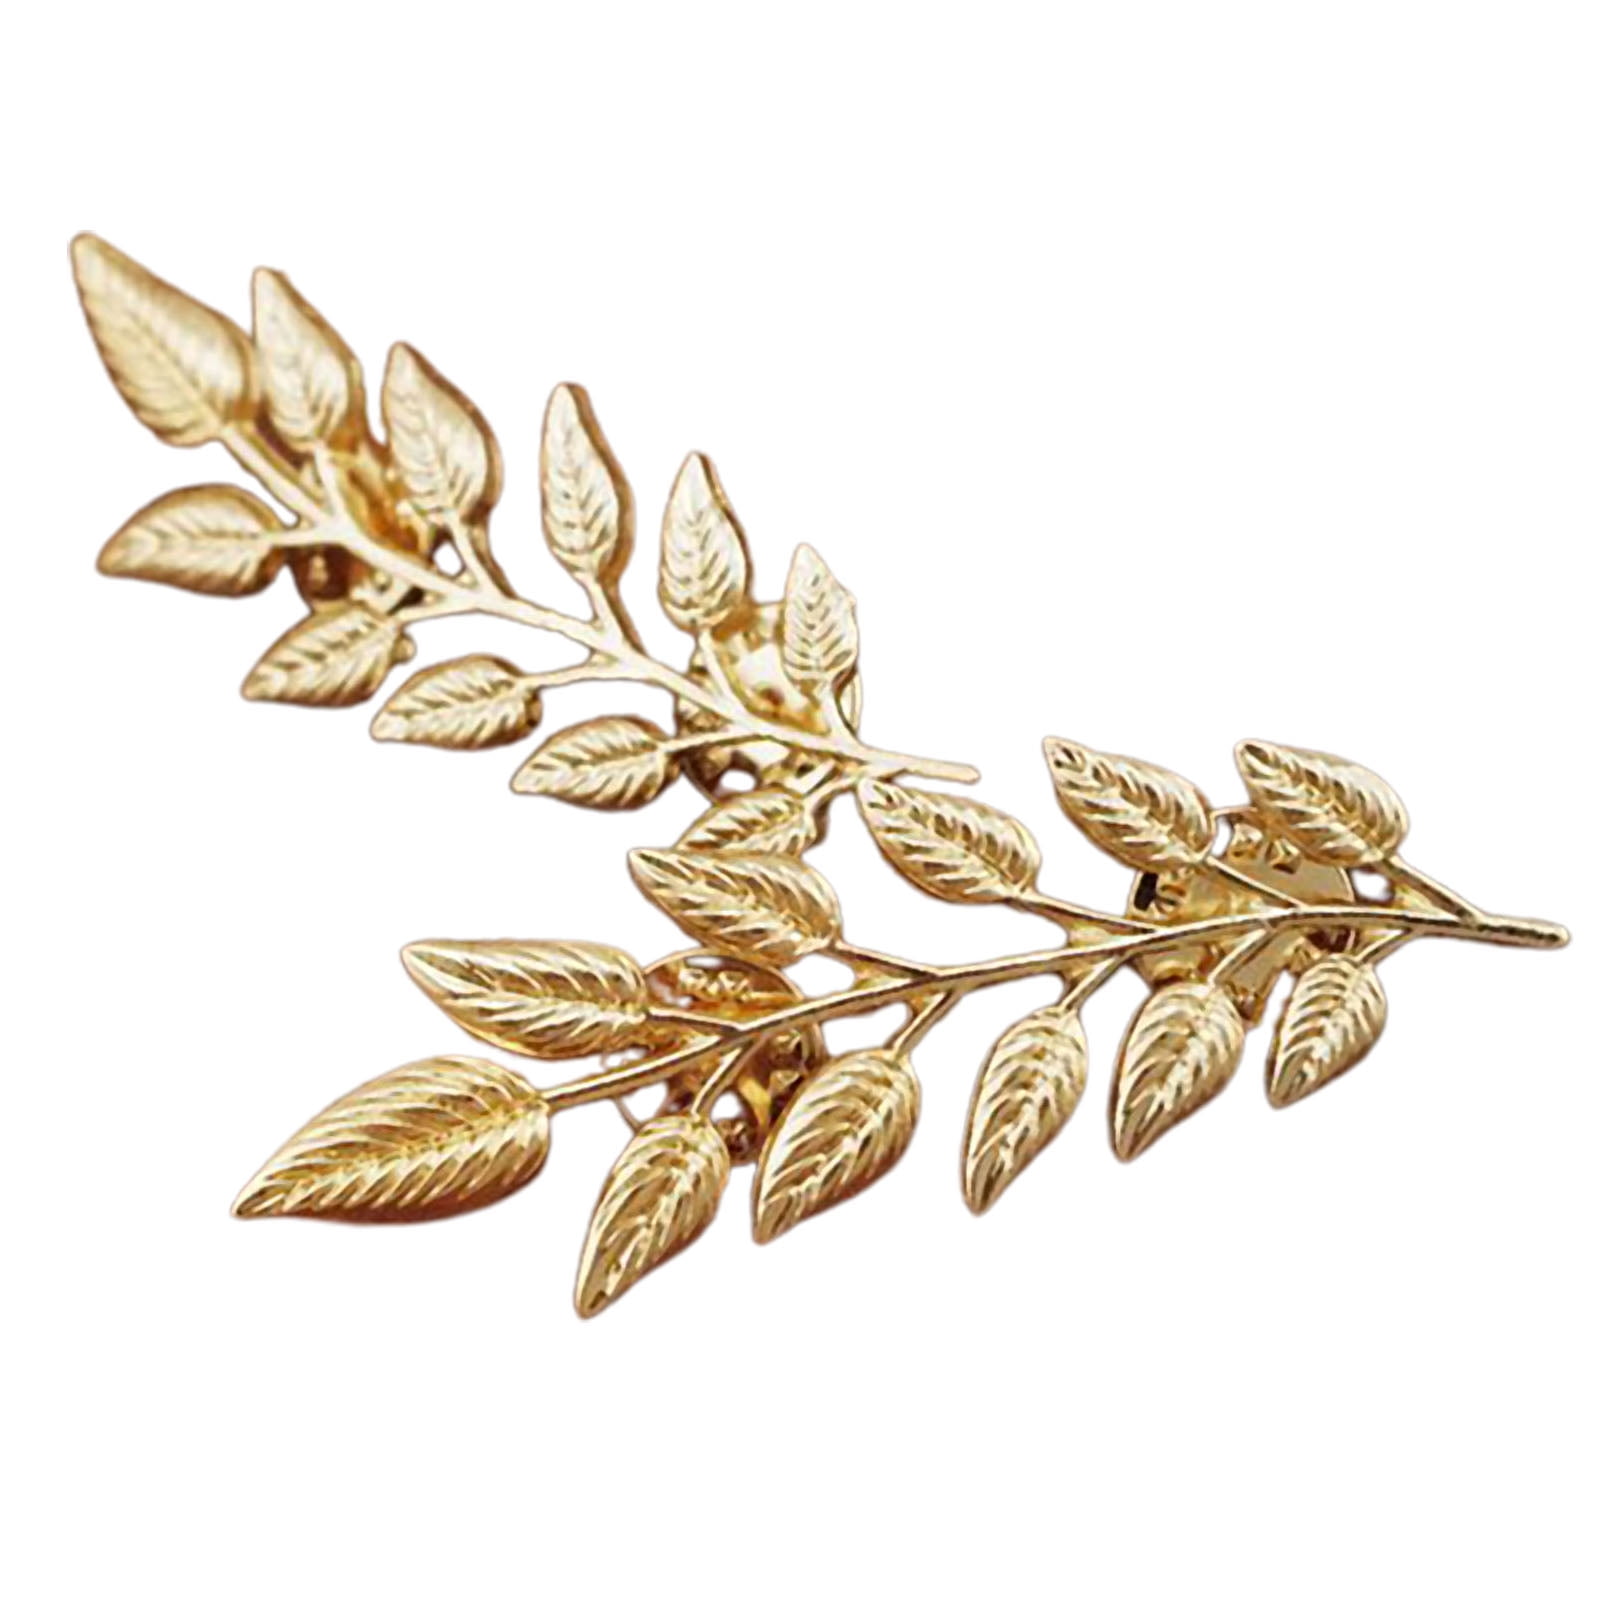 KESYOO Leaf Shape Brooch brooches for women silver brooch collar brooch  clothes pin women party jewelry leaf shape corsage Miss Leaves clothespin